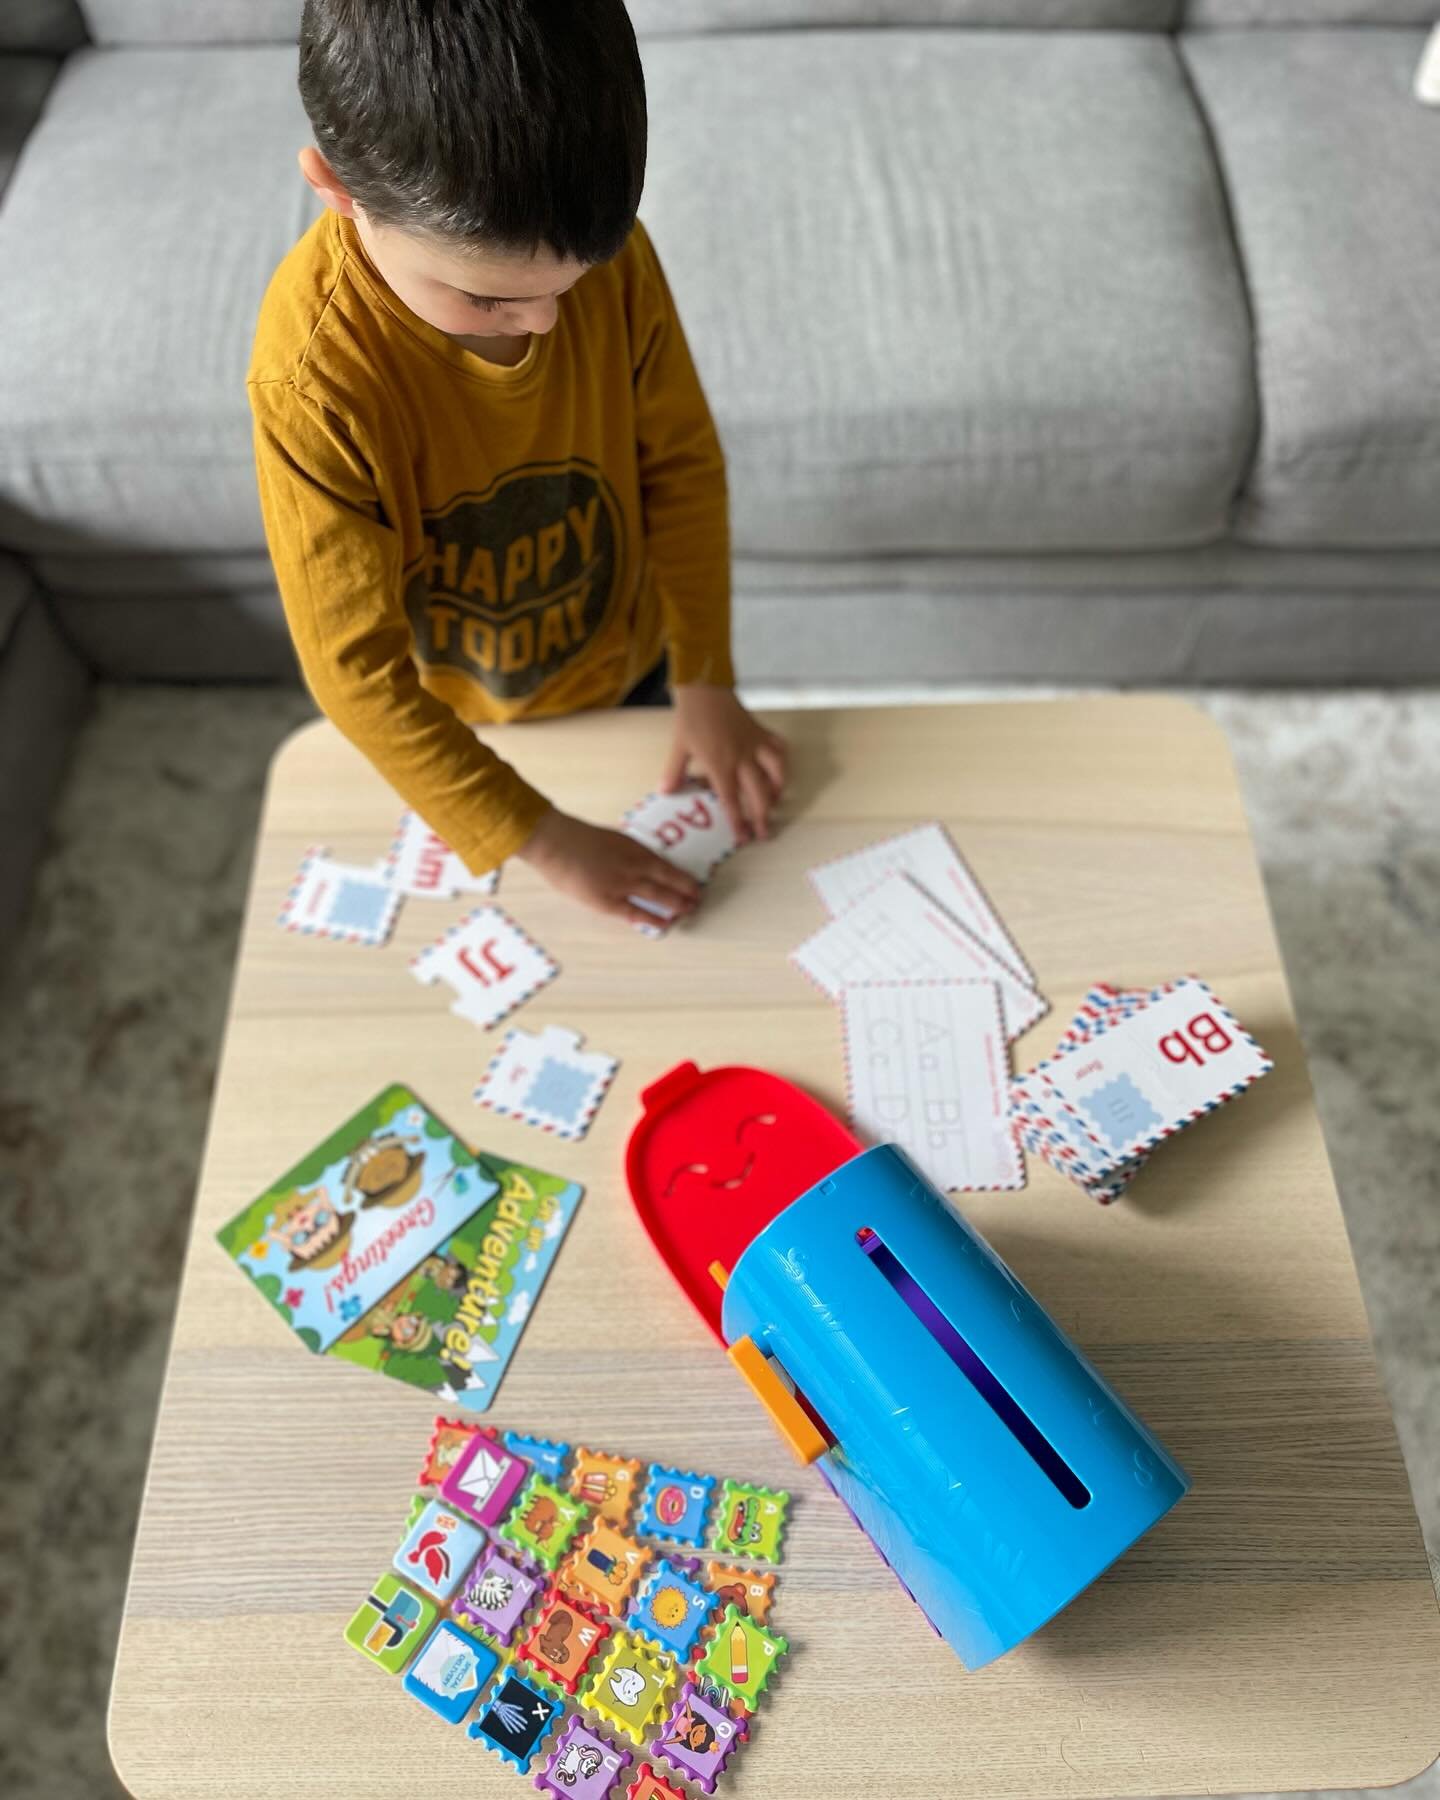 Connecting some 2 piece letter puzzles this morning with the Alphabet Learning Mailbox from @learningresources.
When homeschooling I always find it nice to have 1 or 2 activities ready for my two preschoolers in the morning as they are eager to &ldqu